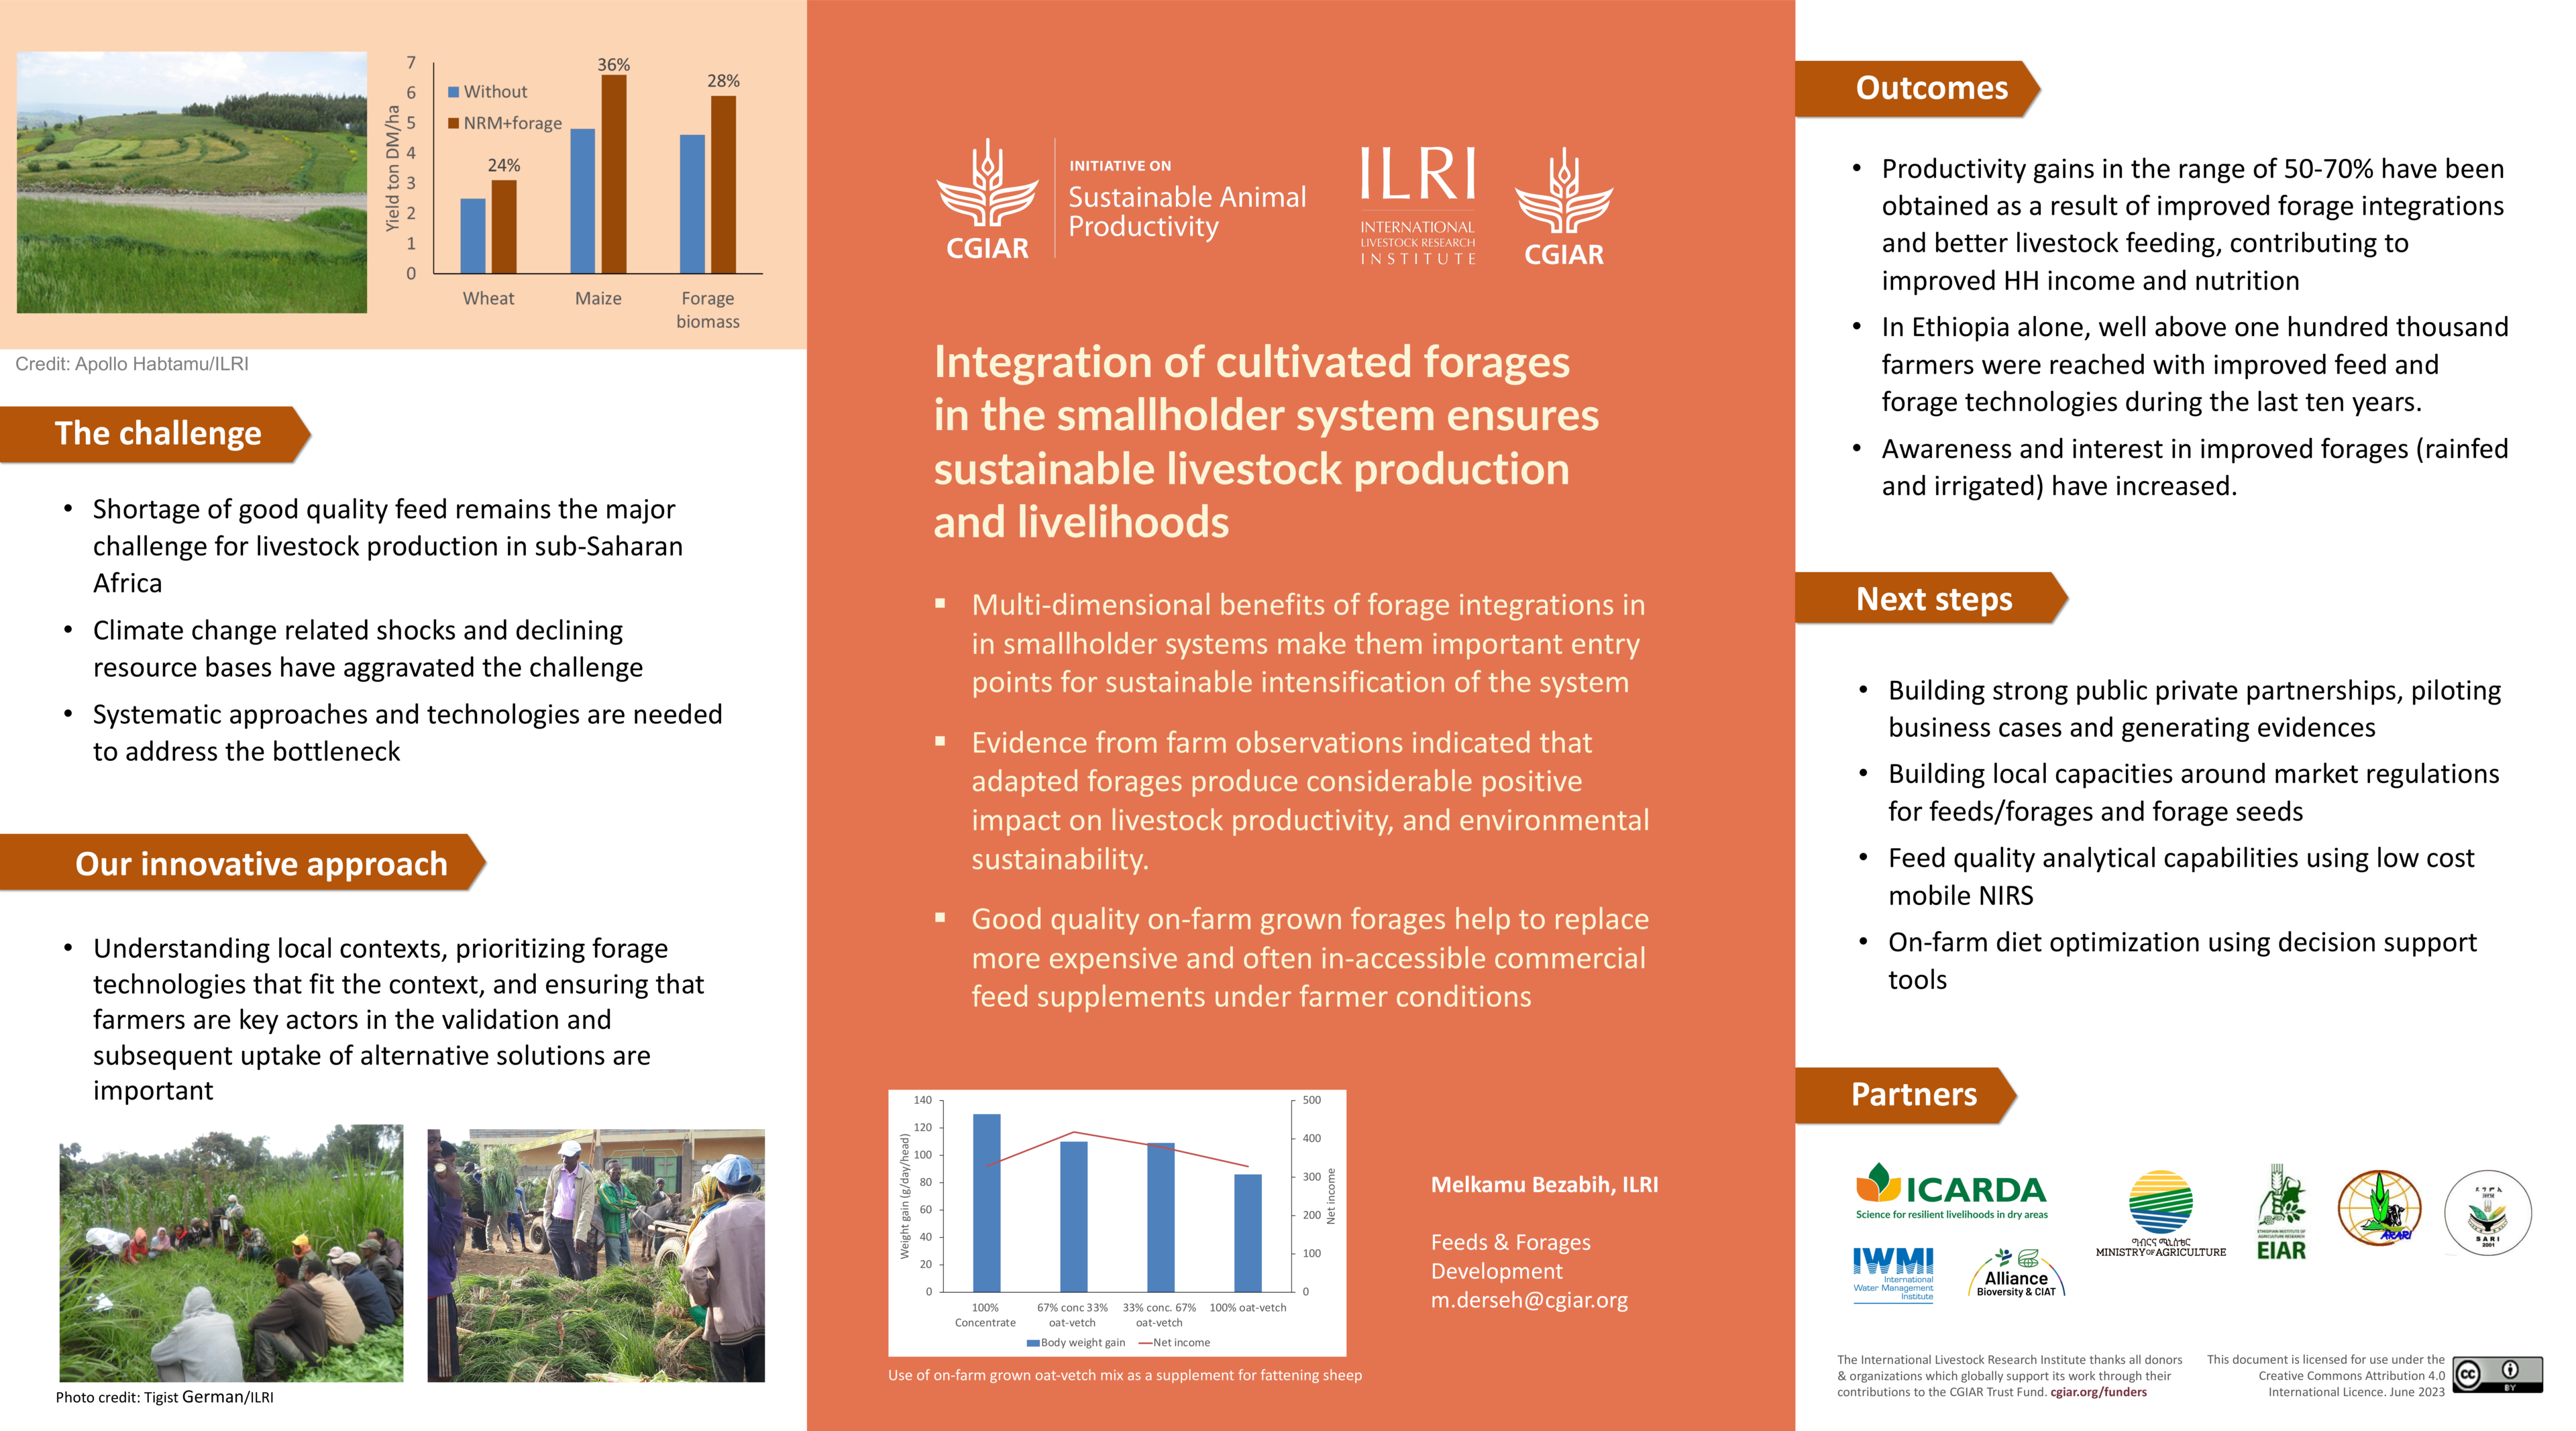 Integration of cultivated forages in the smallholder system ensures sustainable livestock production and livelihoods  